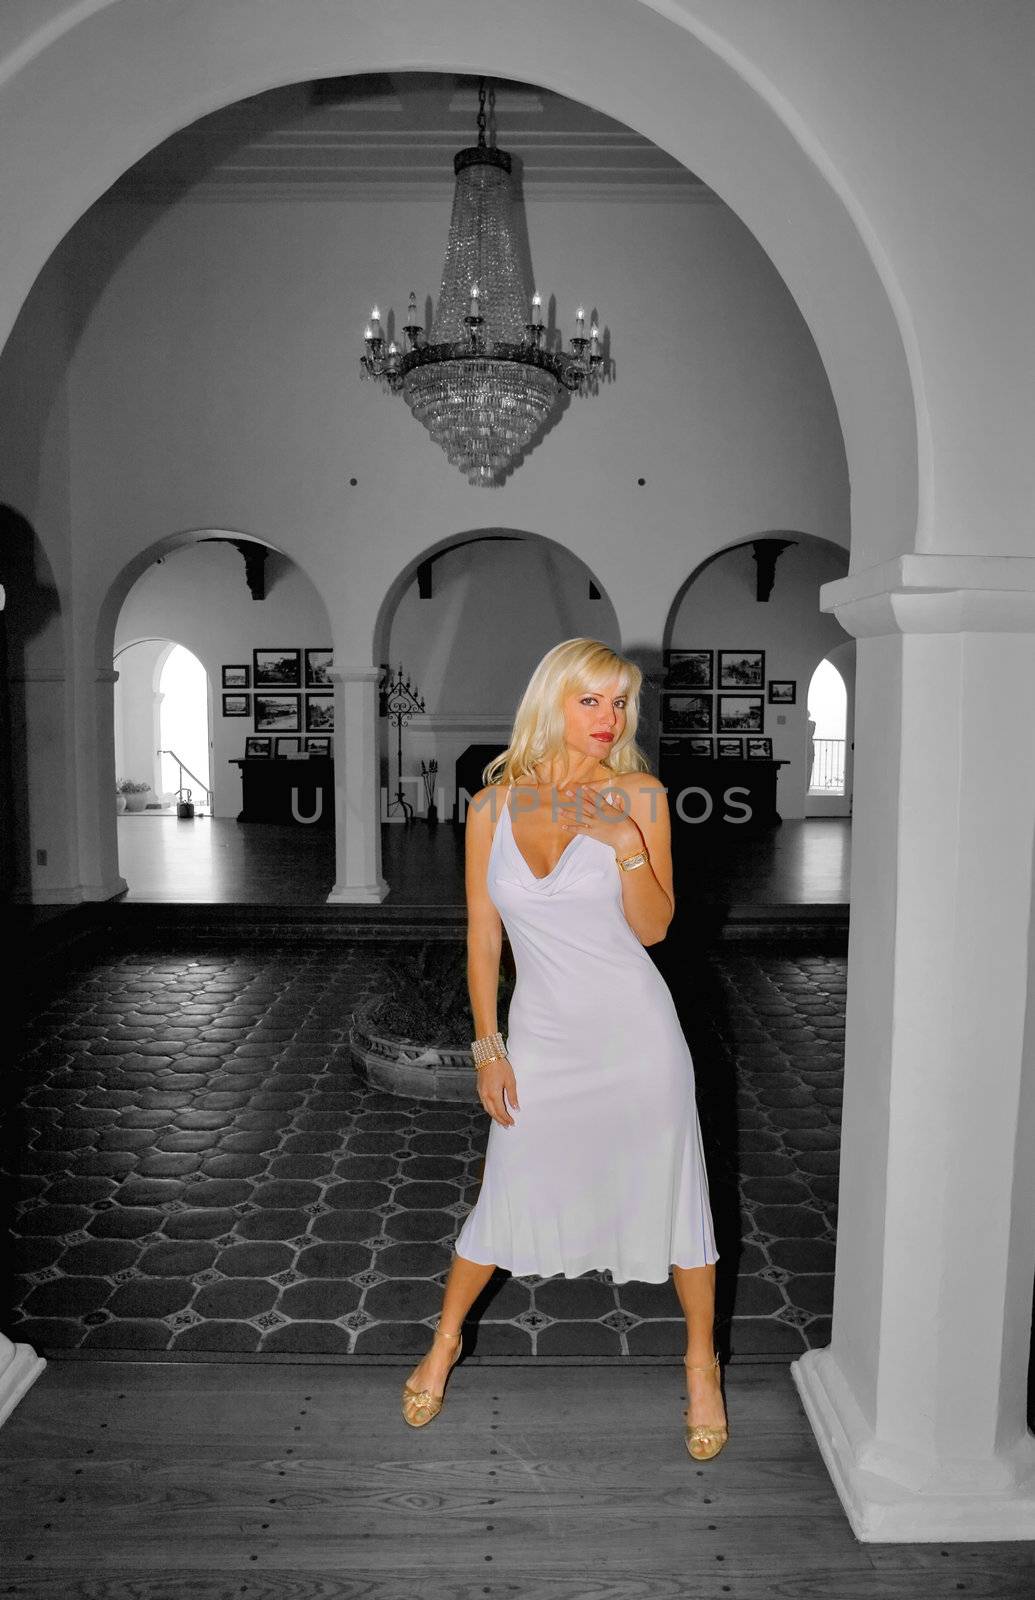 Blond Woman wearin a White Dress in archway B&W and Color.